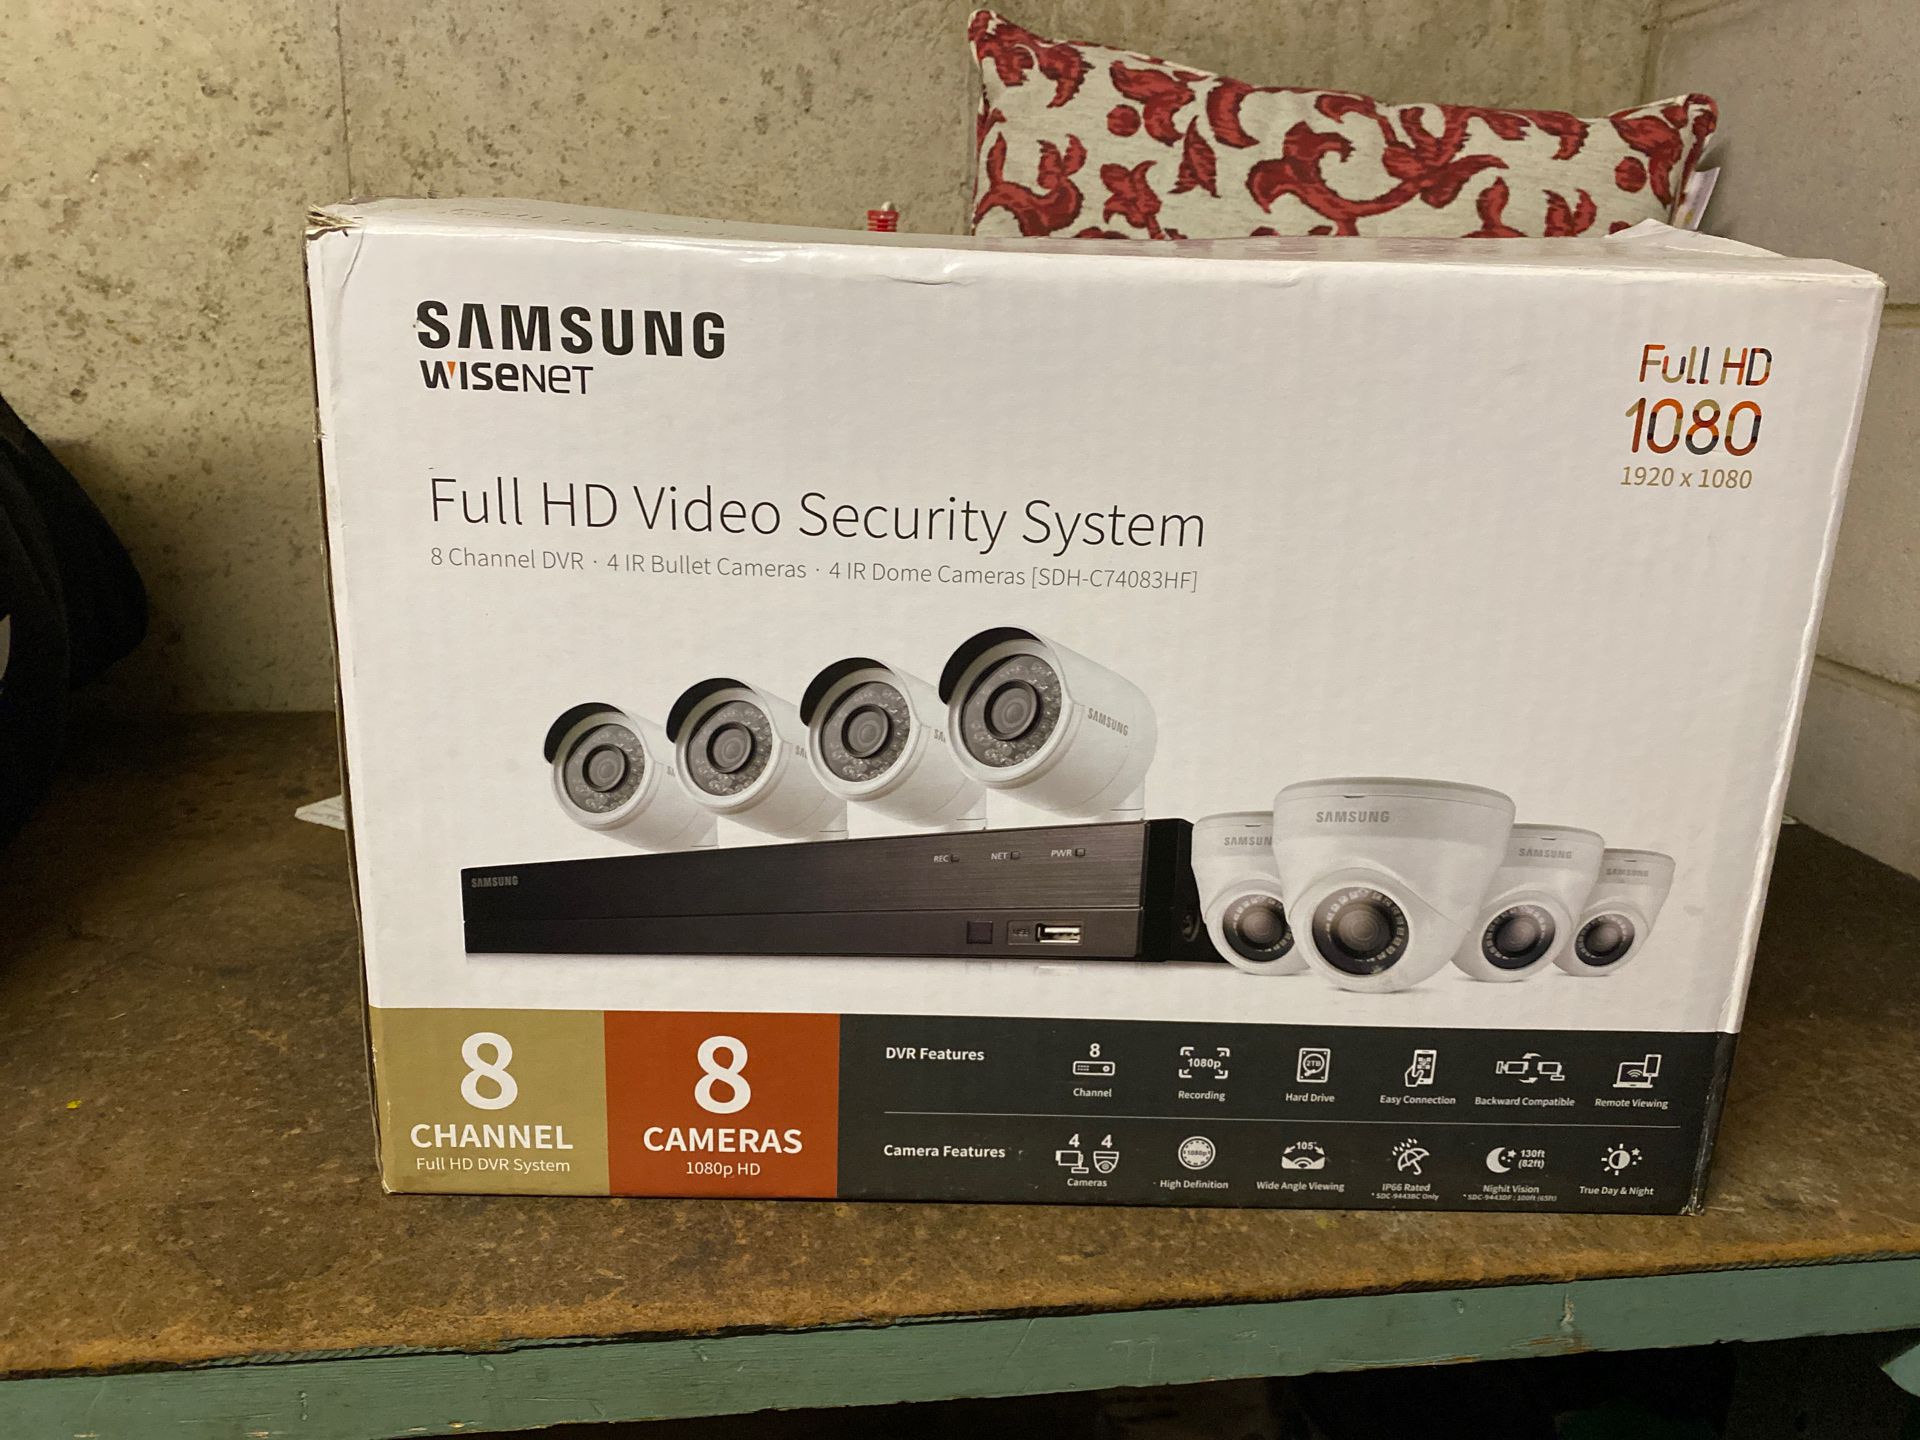 Samsung wisenet security wired system (brand new, never used only opened box.)